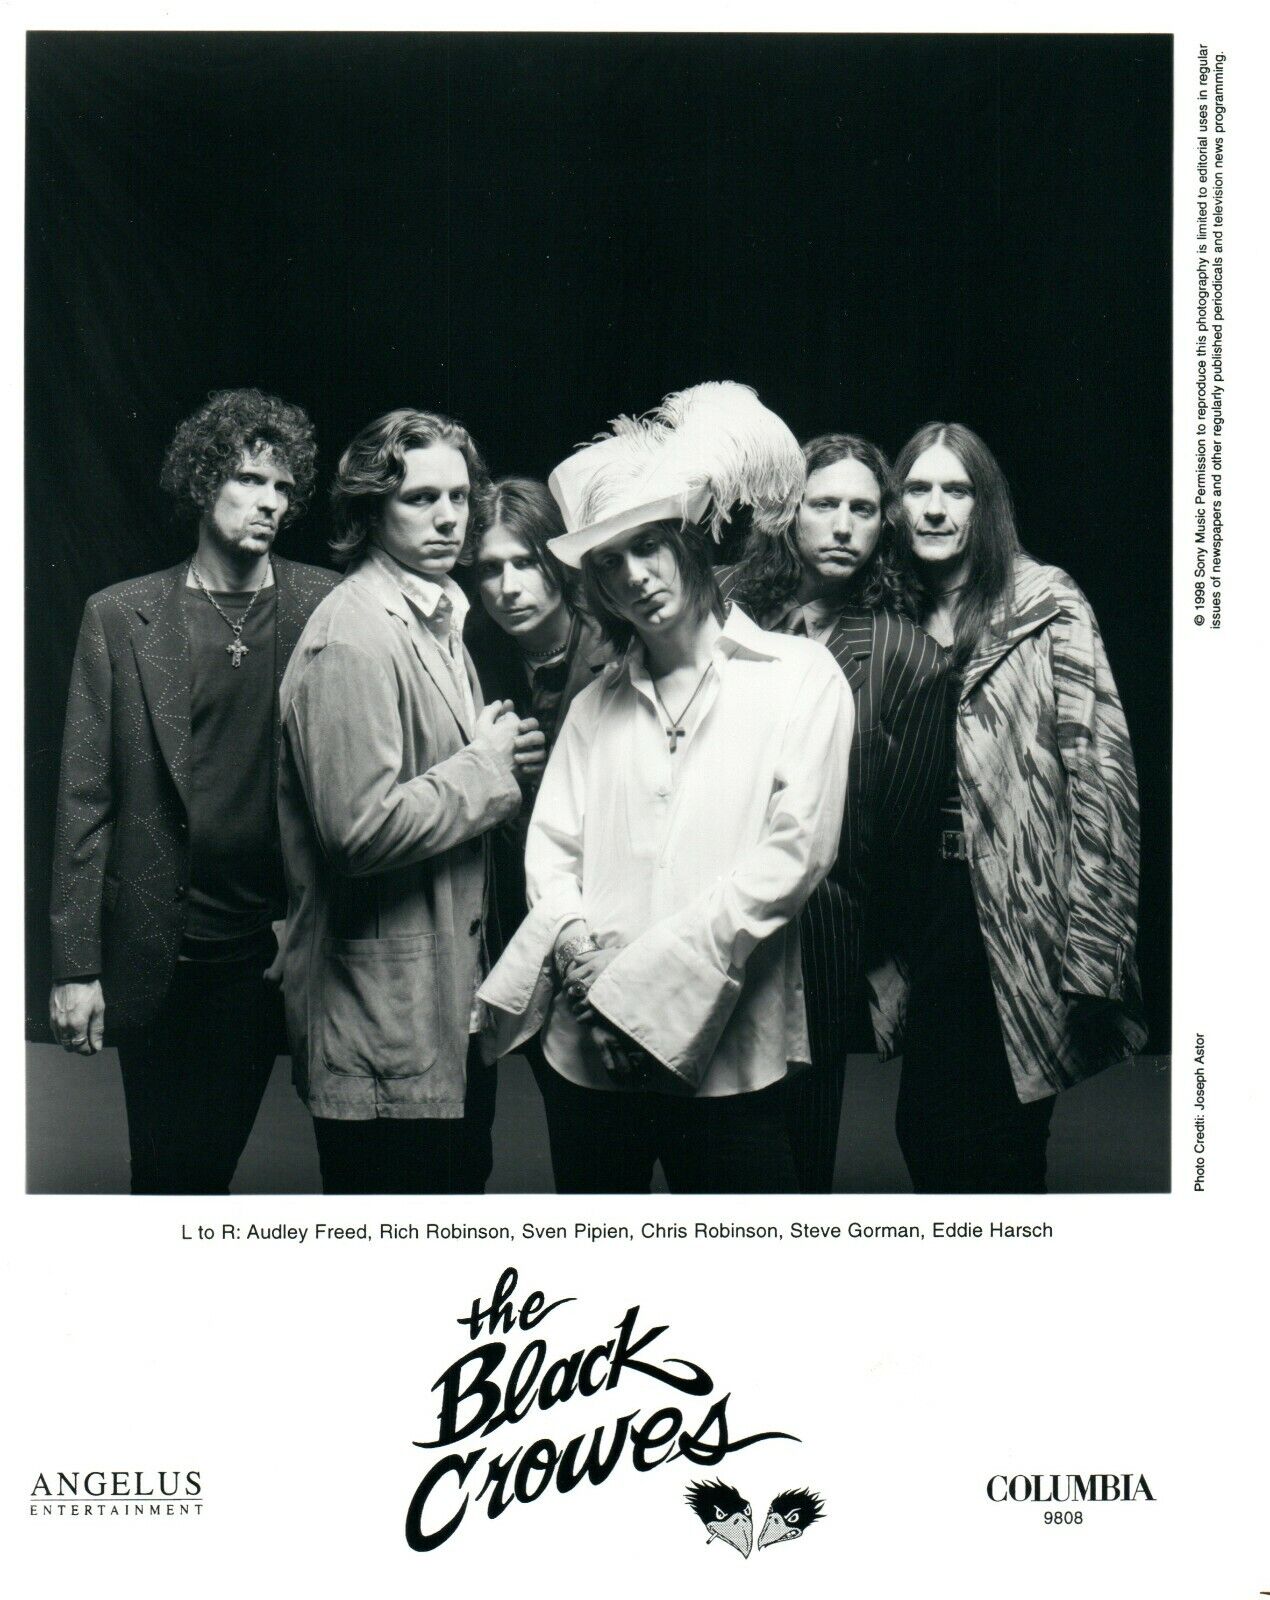 THE BLACK CROWES Rock Music Band 8x10 Promo Press Photo Poster painting Sony Music 1998